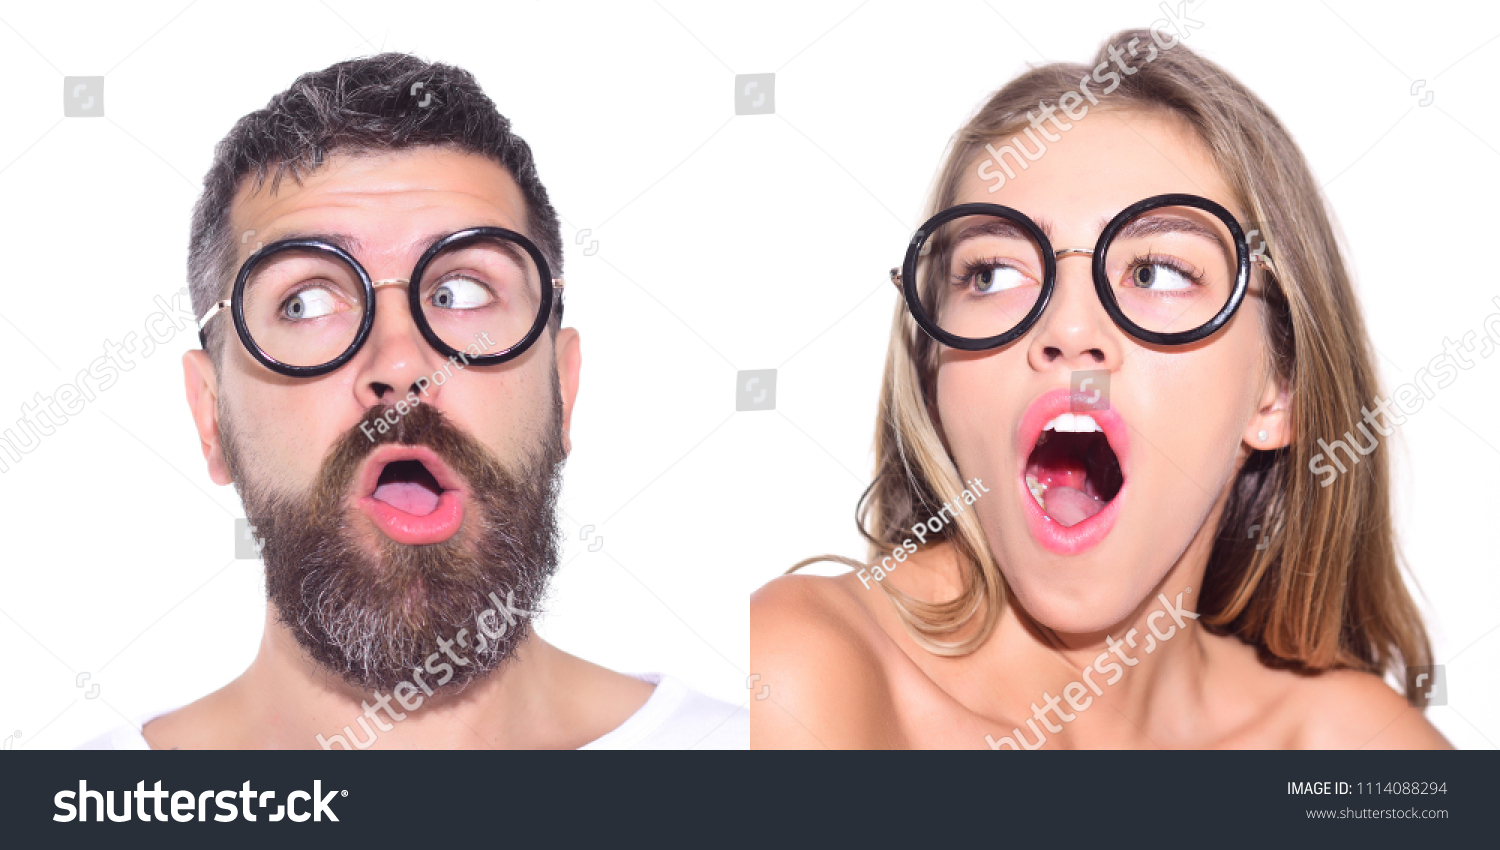 Emotion set of pretty girl and bearded man. Girl in glasses. Bearded man in glasses. Face expression. Collage of emotions. Different emotions. Feeling and emotions. Emoji set. #1114088294